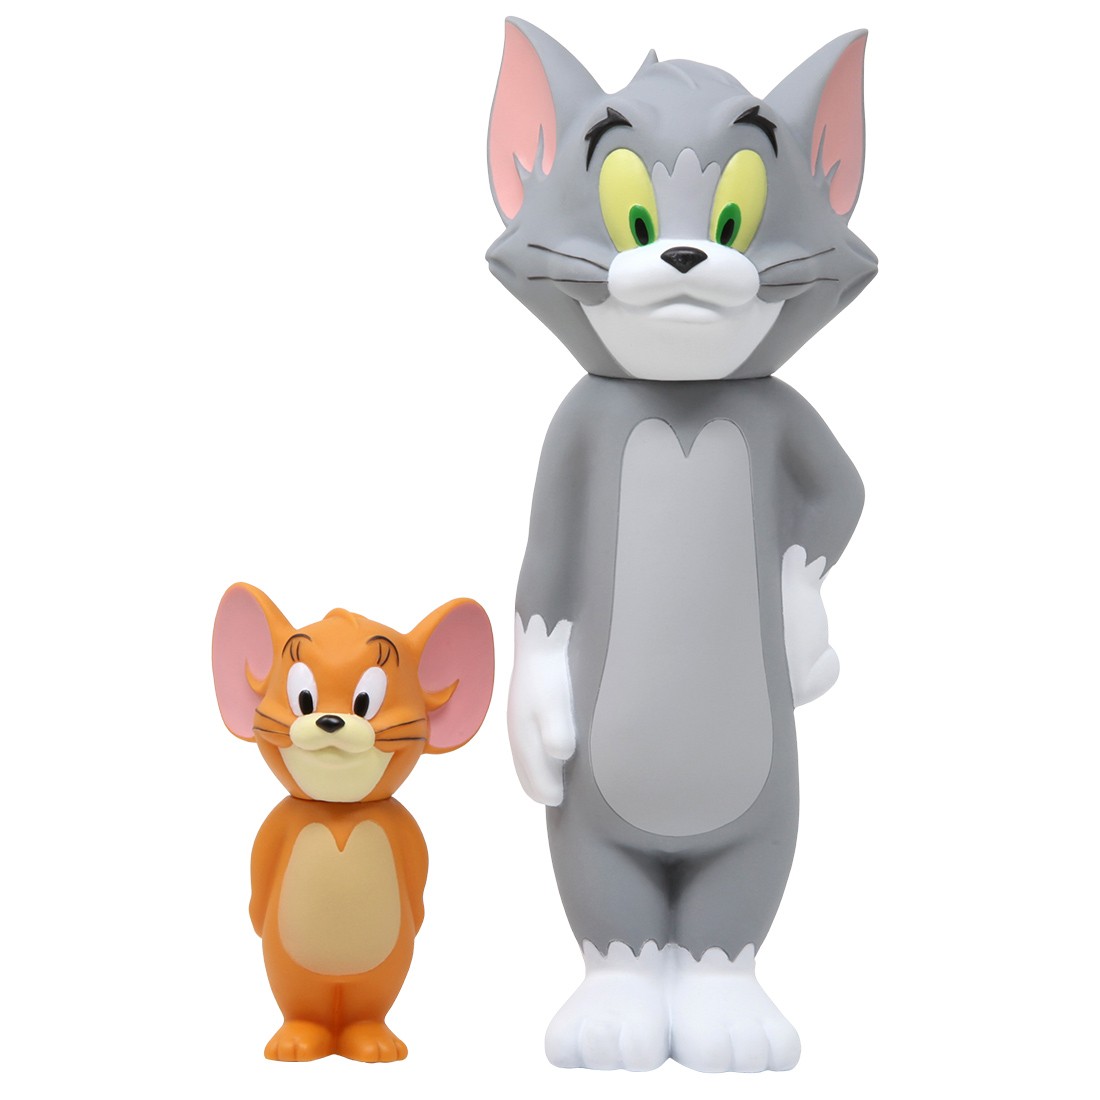 Medicom VCD Tom And Jerry Figures (gray / brown)